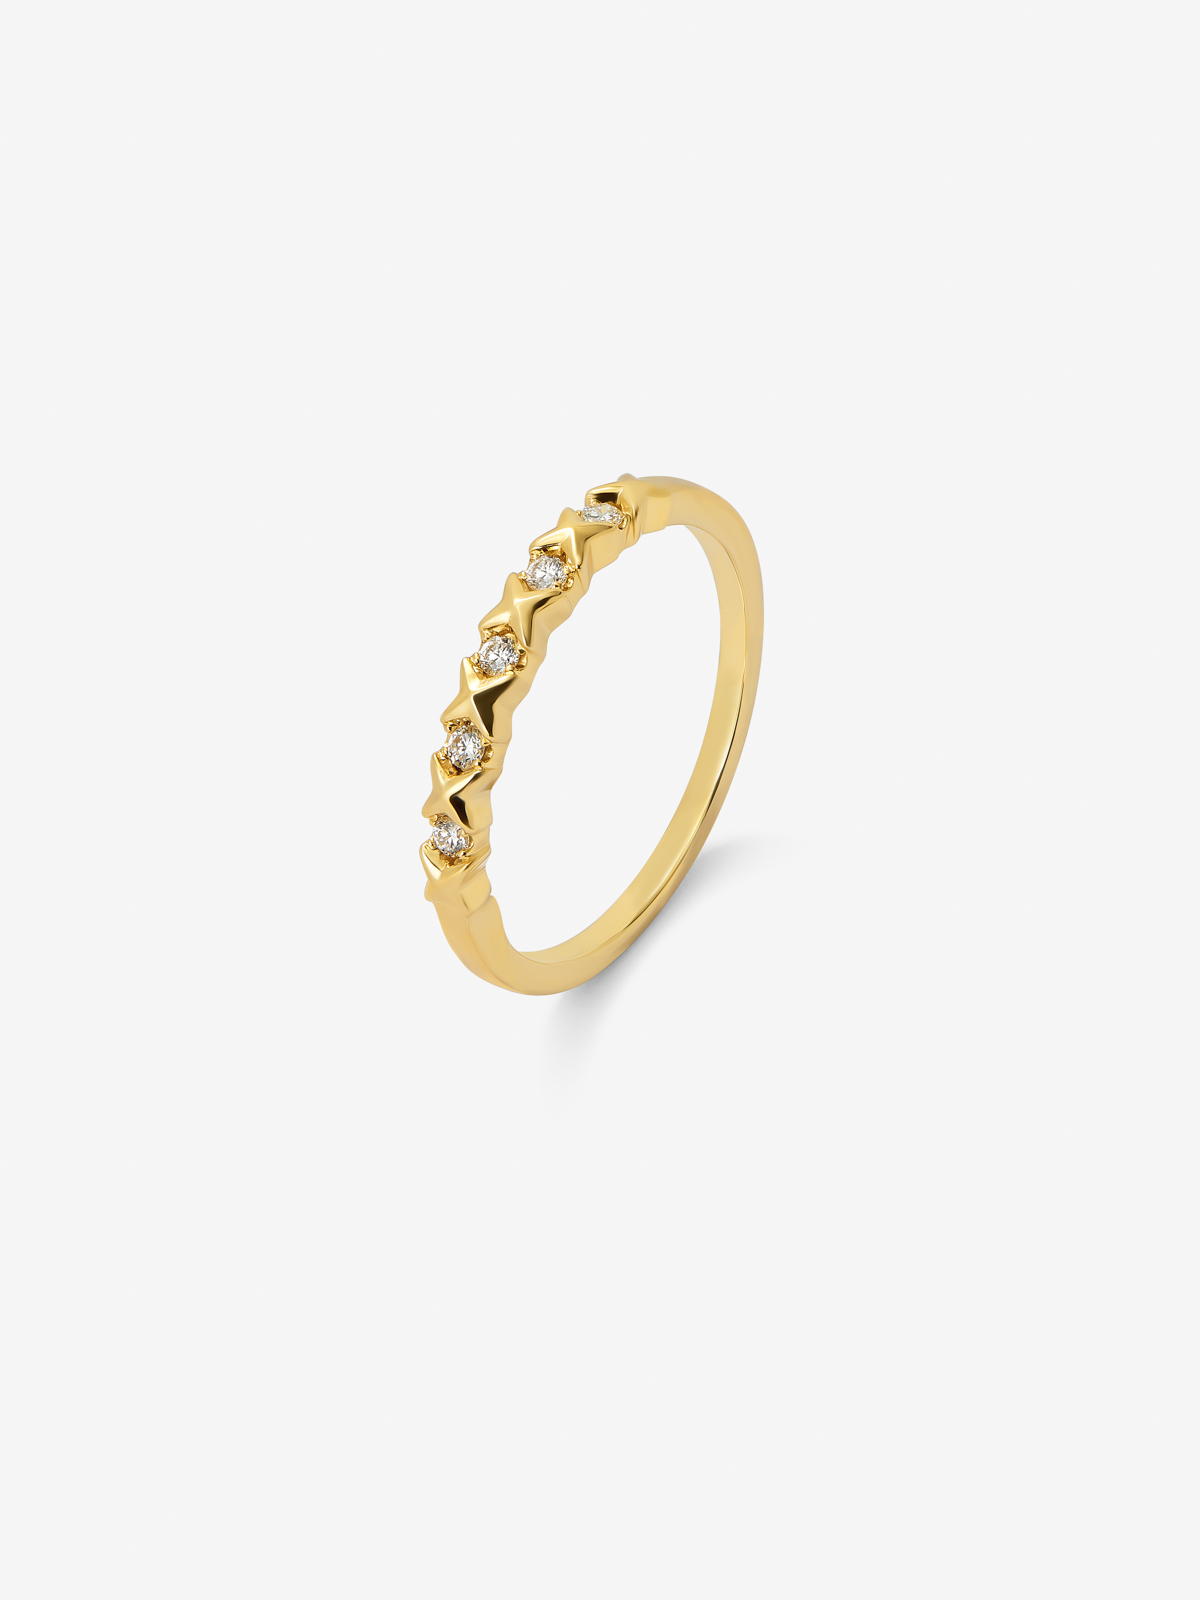 18K yellow gold ring with 5 brilliant-cut diamonds with a total of 0.07 cts